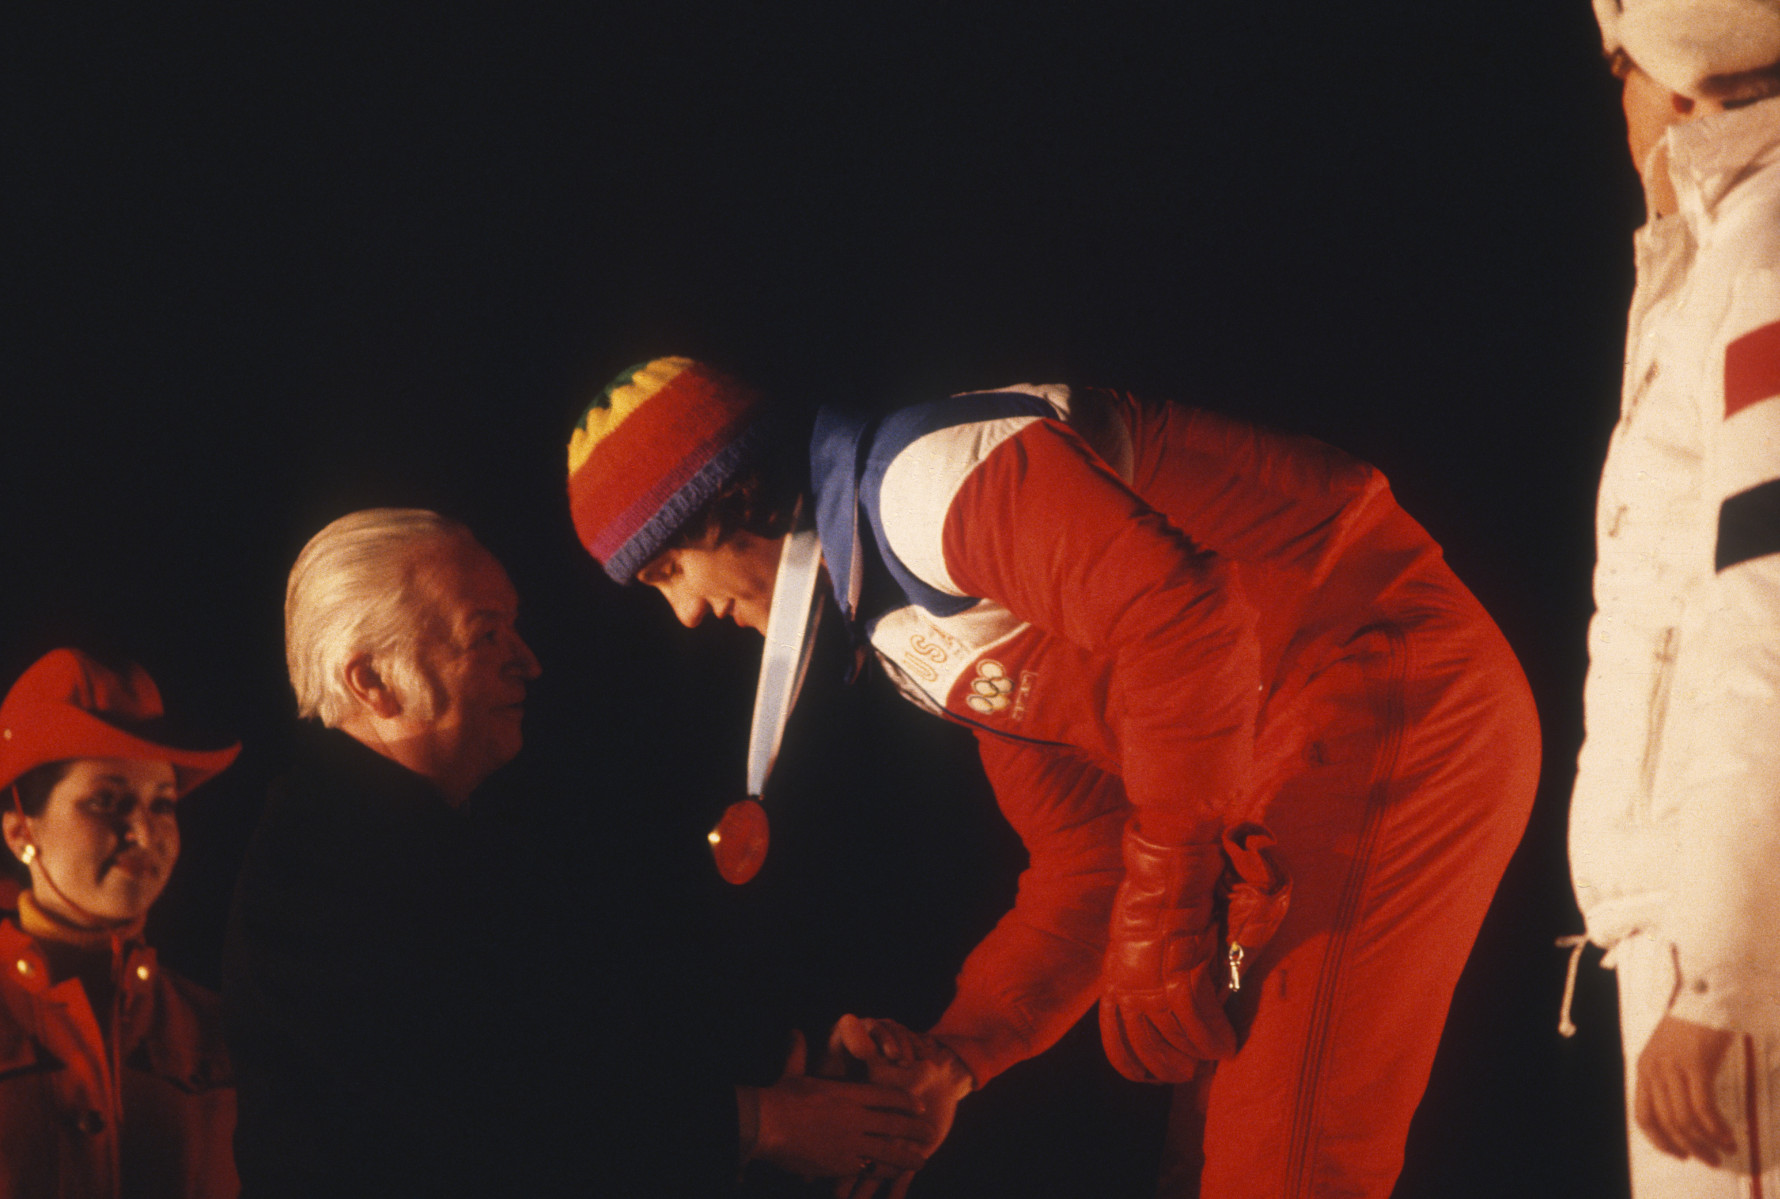 Eric Heiden being awarded one of his five gold medals at the 1980 Lake Placid Olympics : Sports : Photography by Adam Stoltman: Sports Photography, The Arts, Portraiture, Travel, Photojournalism and Fine Art in New York